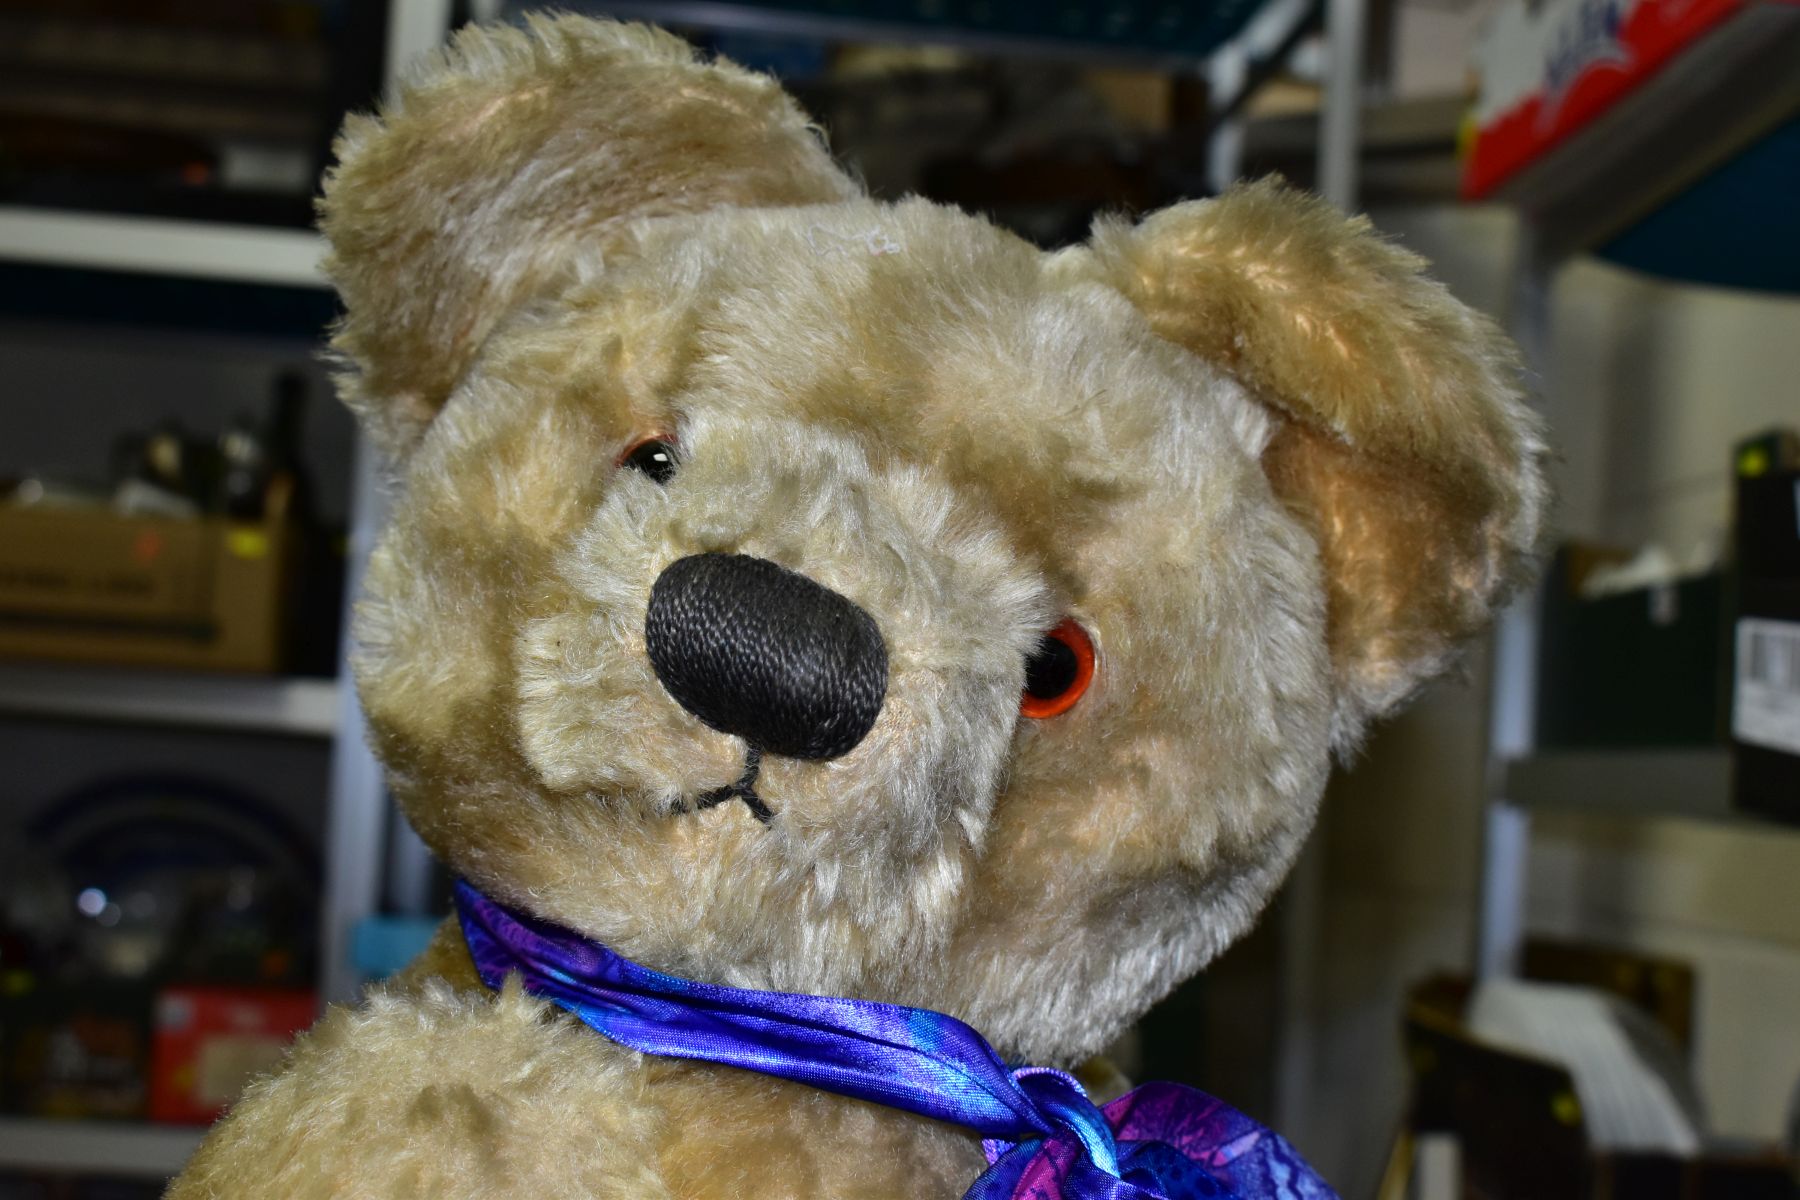 A CHAD VALLEY GOLDEN PLUSH TEDDY BEAR, plastic amber and black eyes, vertically stitched nose, - Image 2 of 4